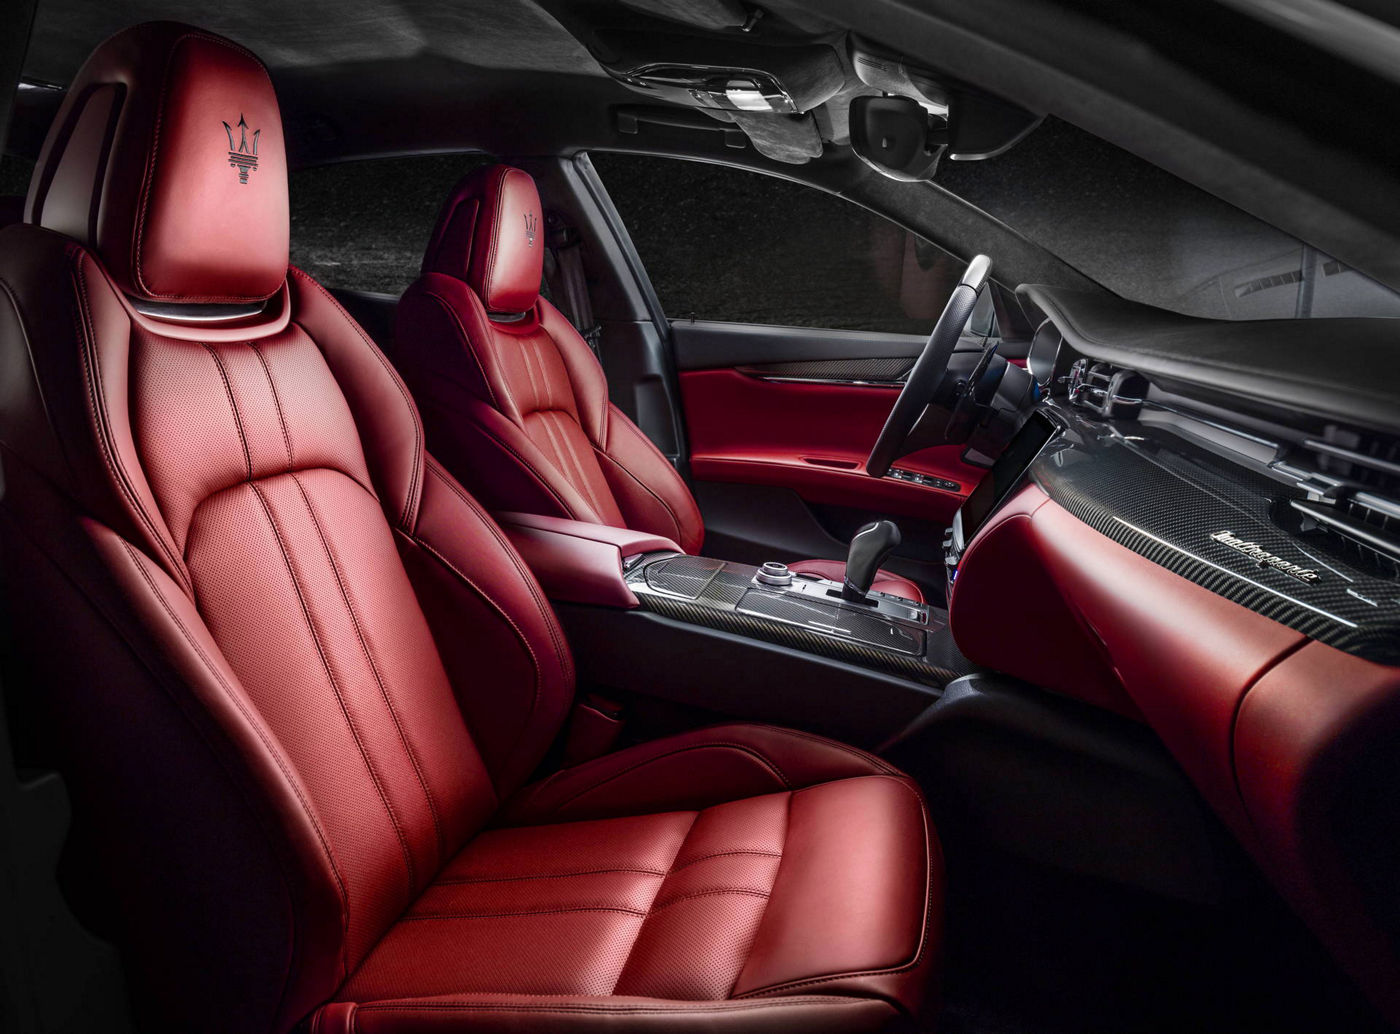 Red and black interiors of a Maserati Quattroporte: details for comfort in the luxury saloon